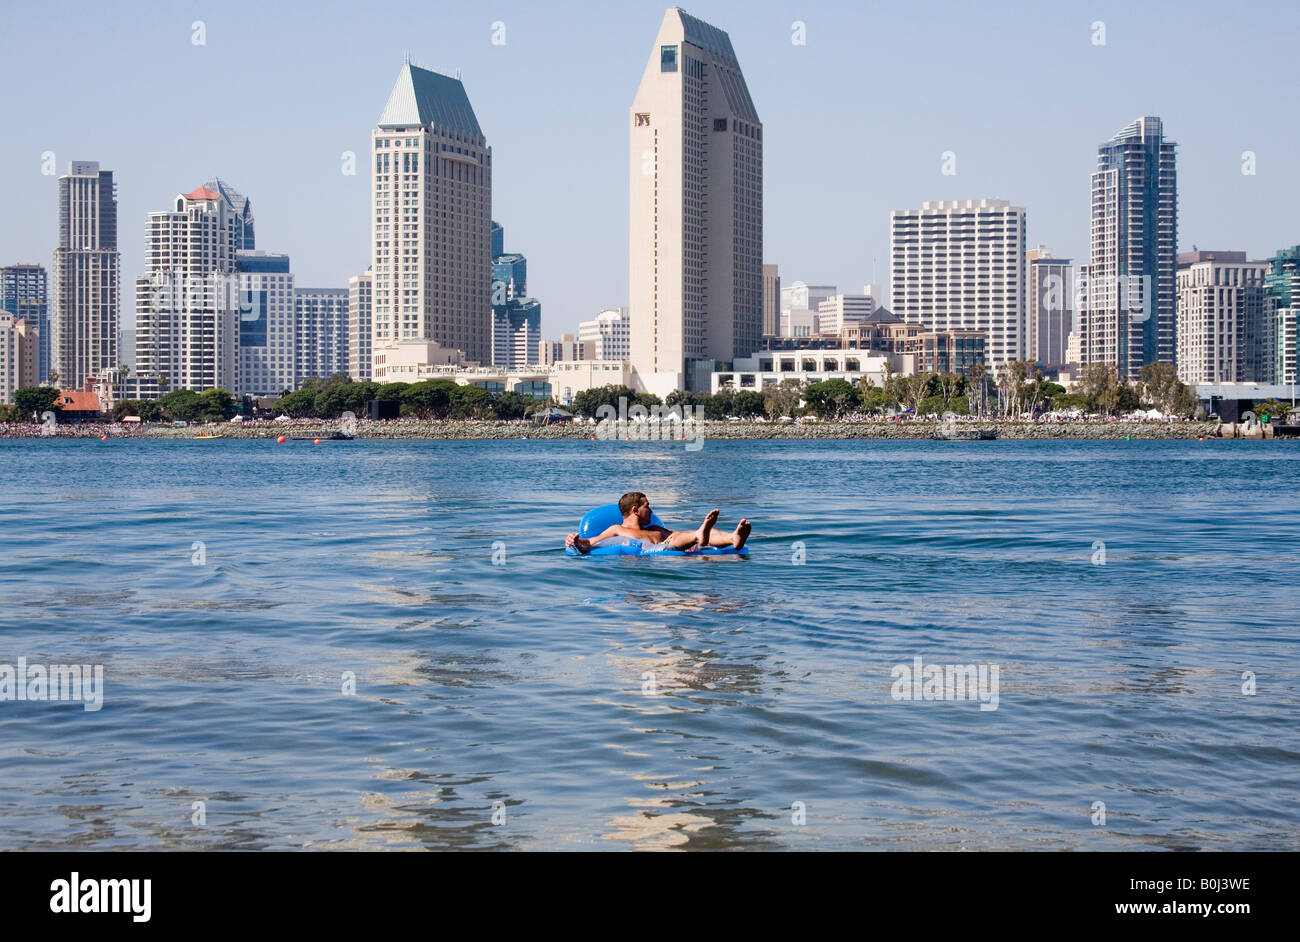 A man floats on a small blue raft, with the San Diego skyline in the background.  It is a beautiful summer day. Stock Photo